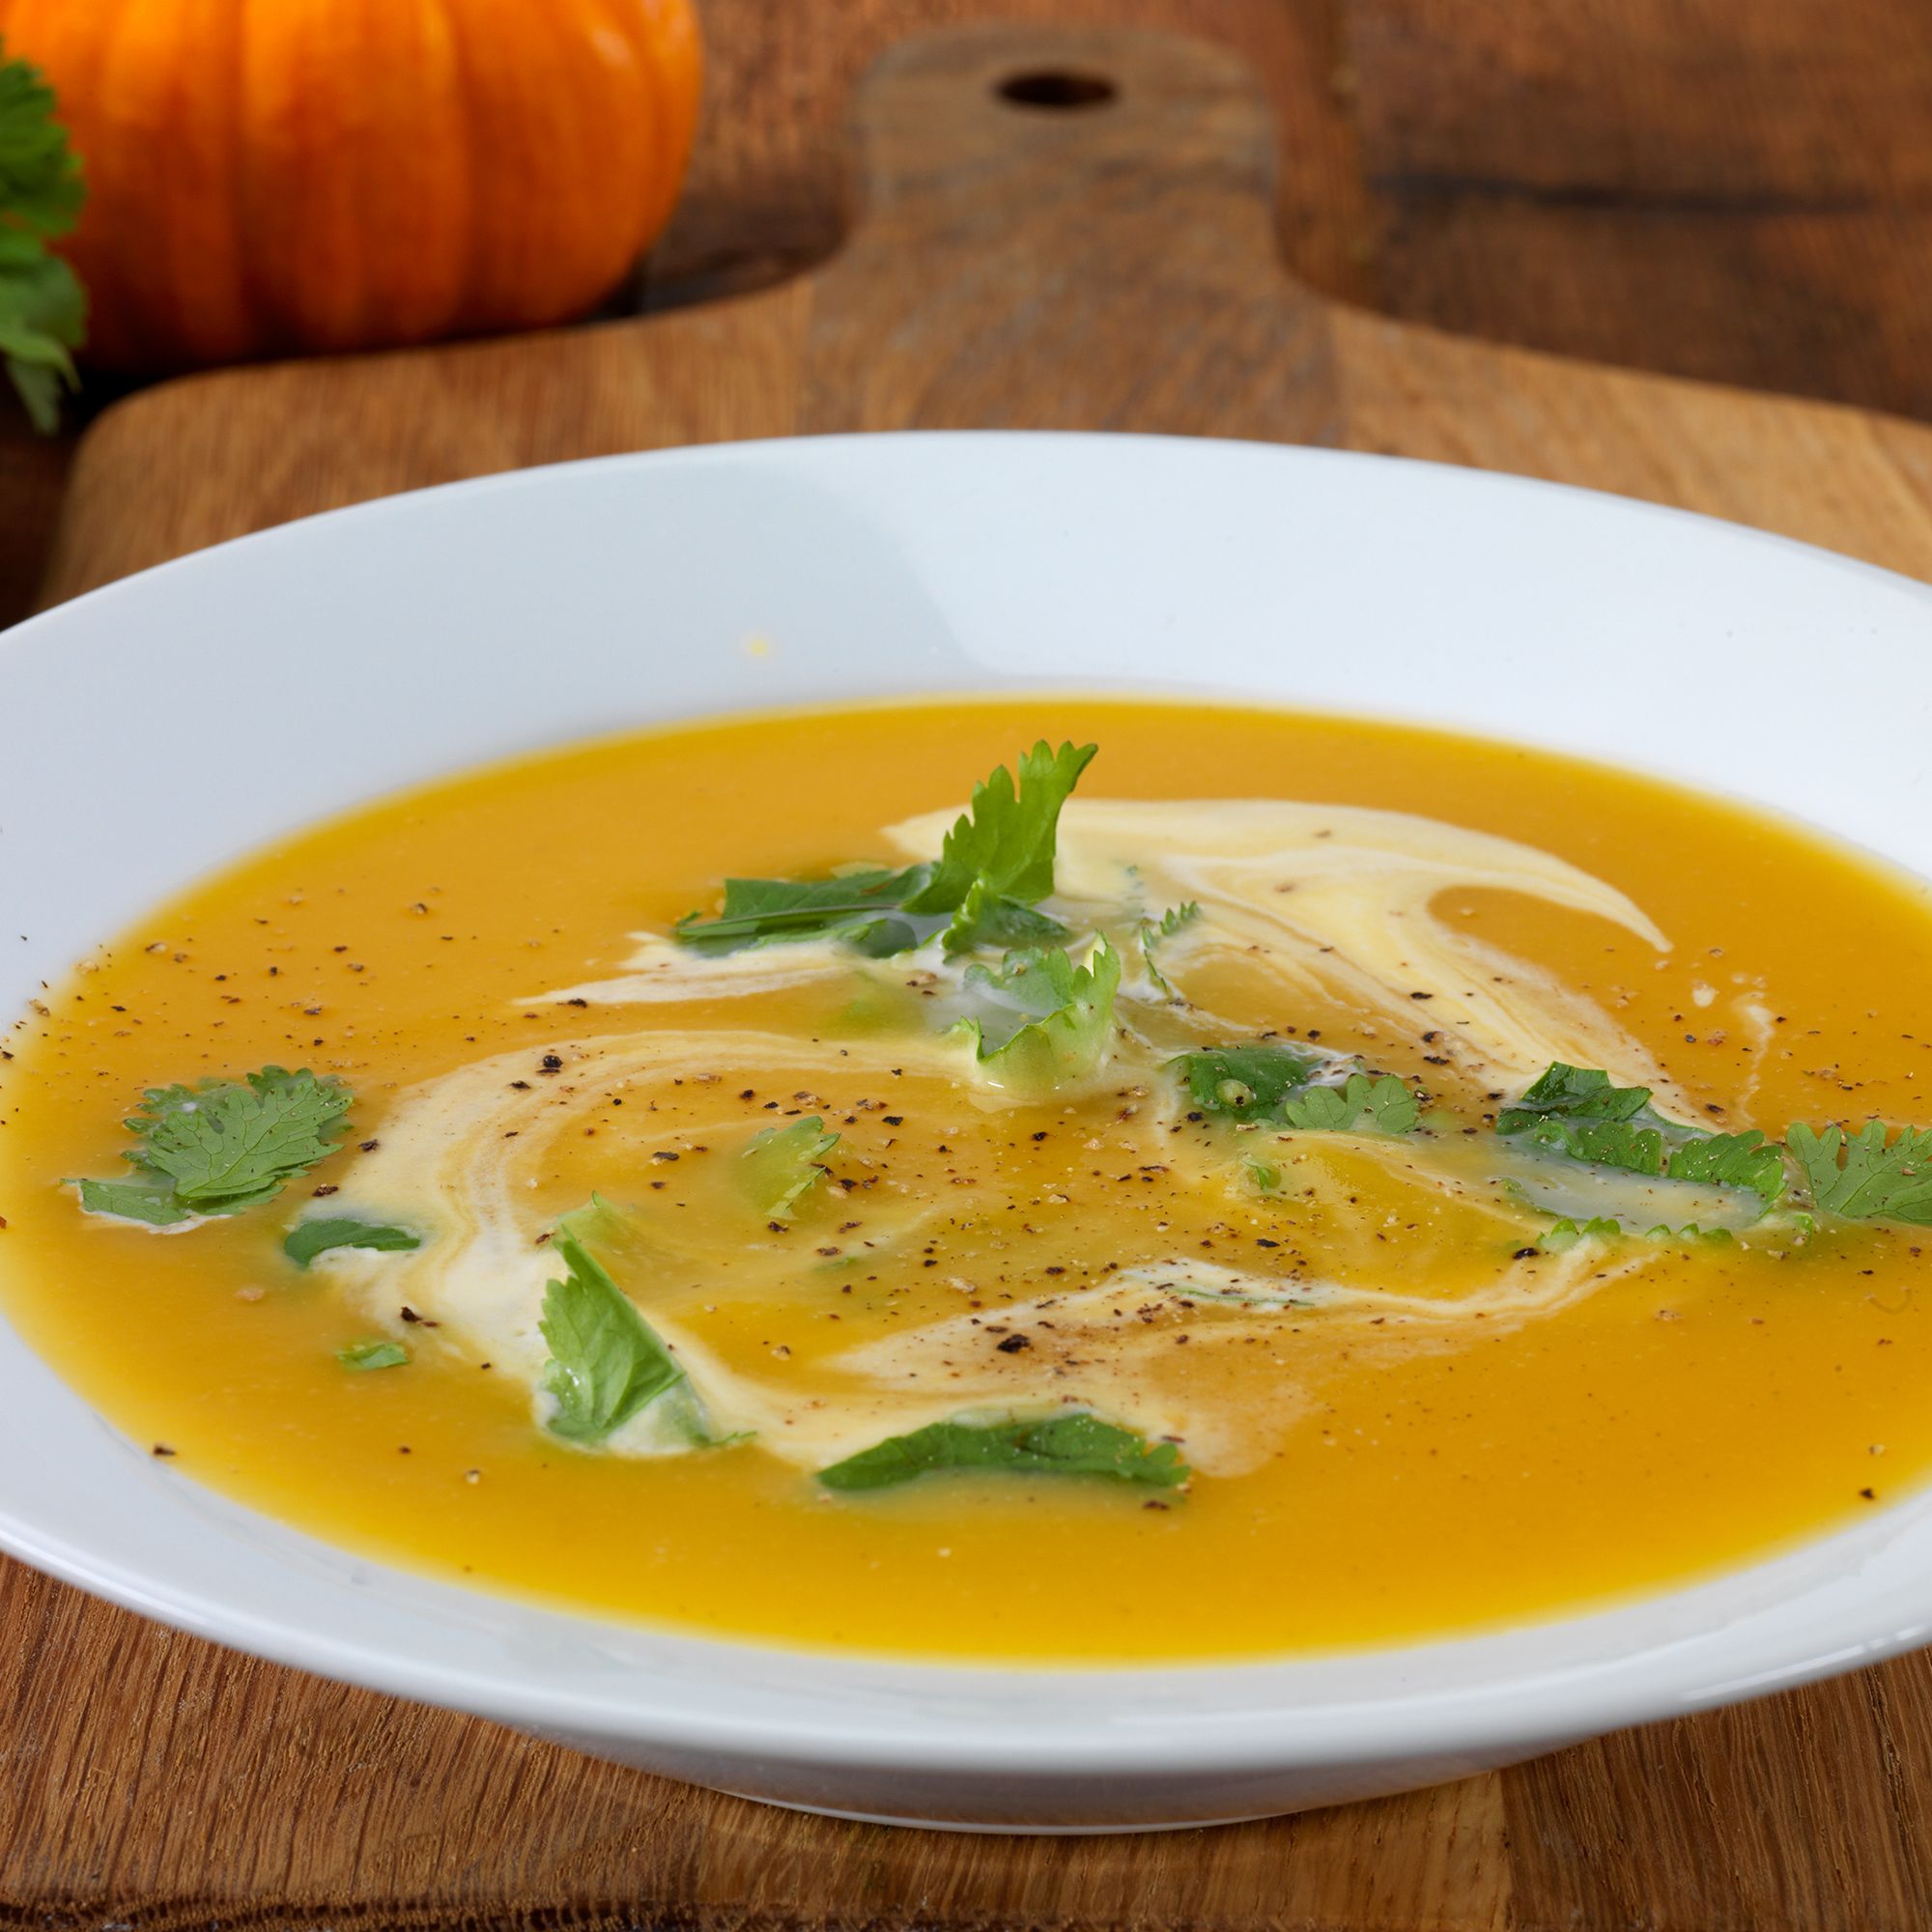 Dietary-Friendly Soup Recipes for Every Palate